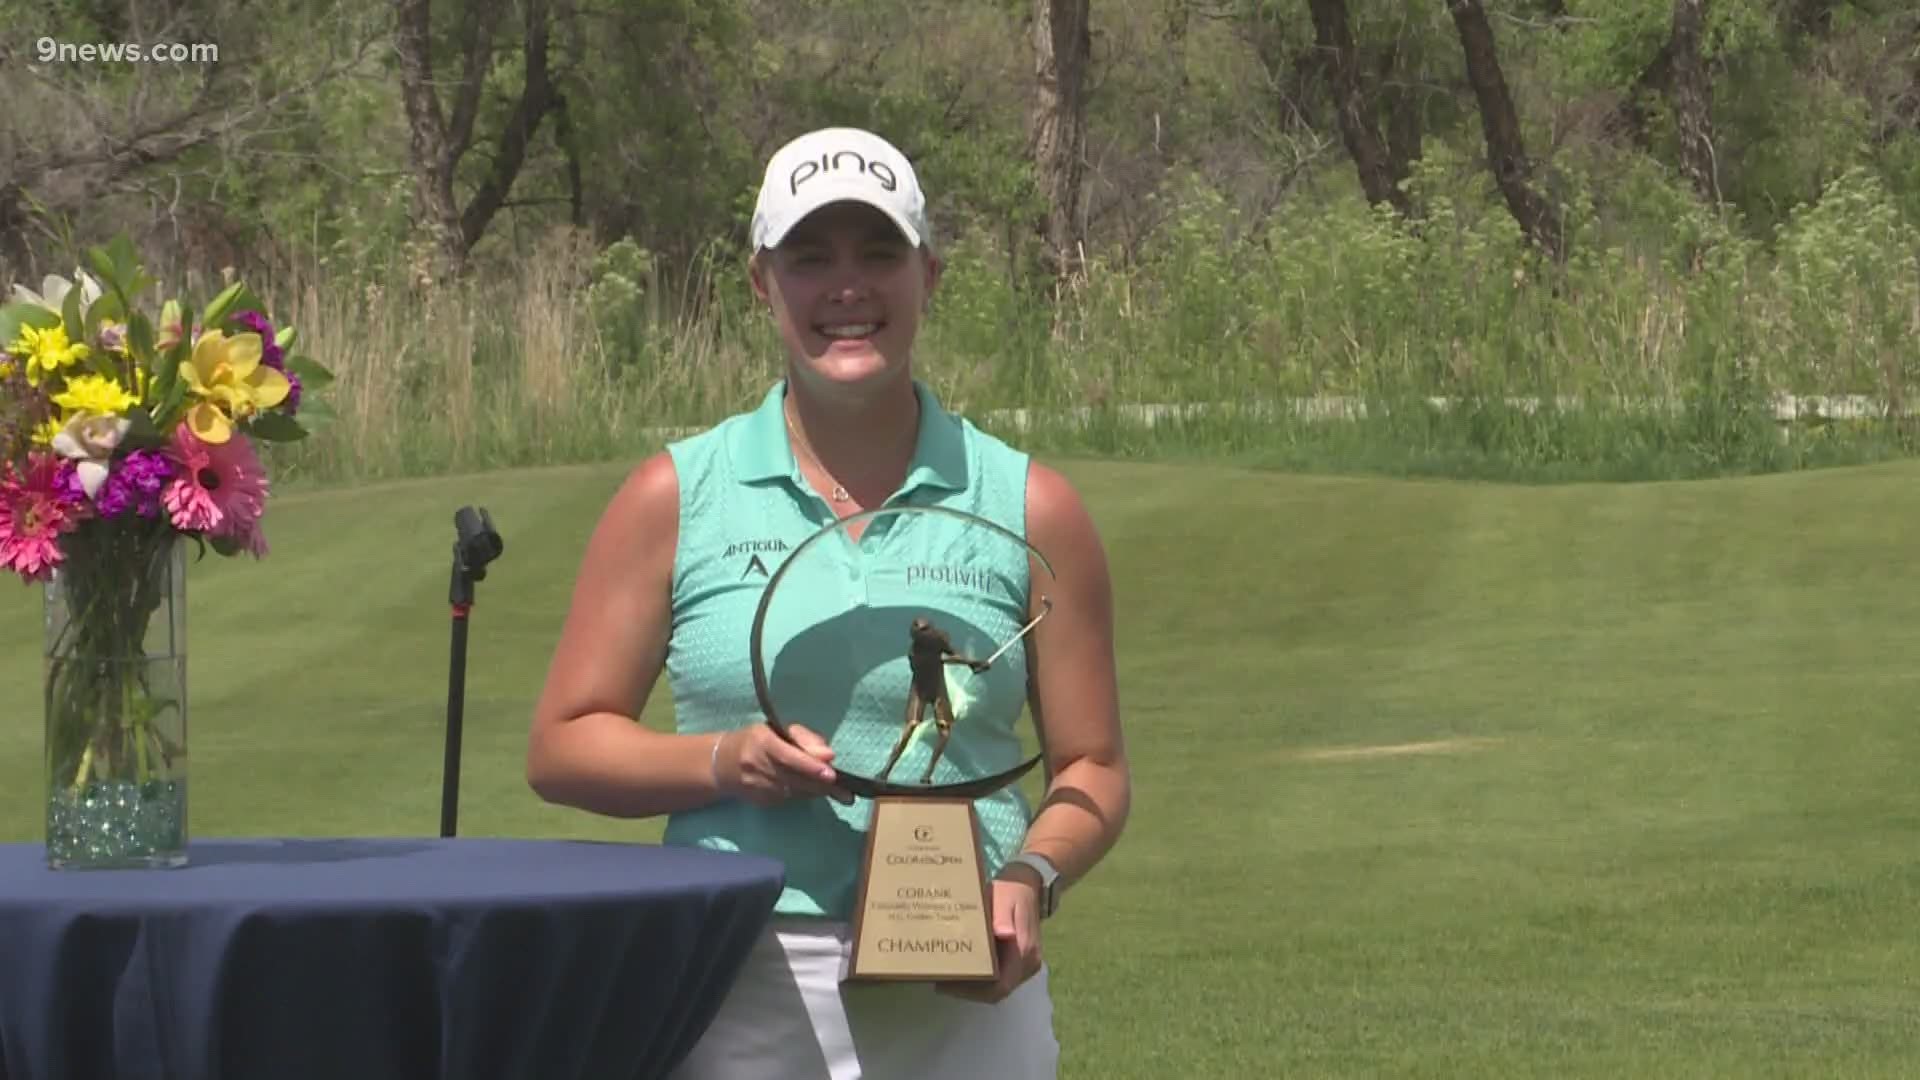 The Westminster native captured her first professional win in her home state on Friday.